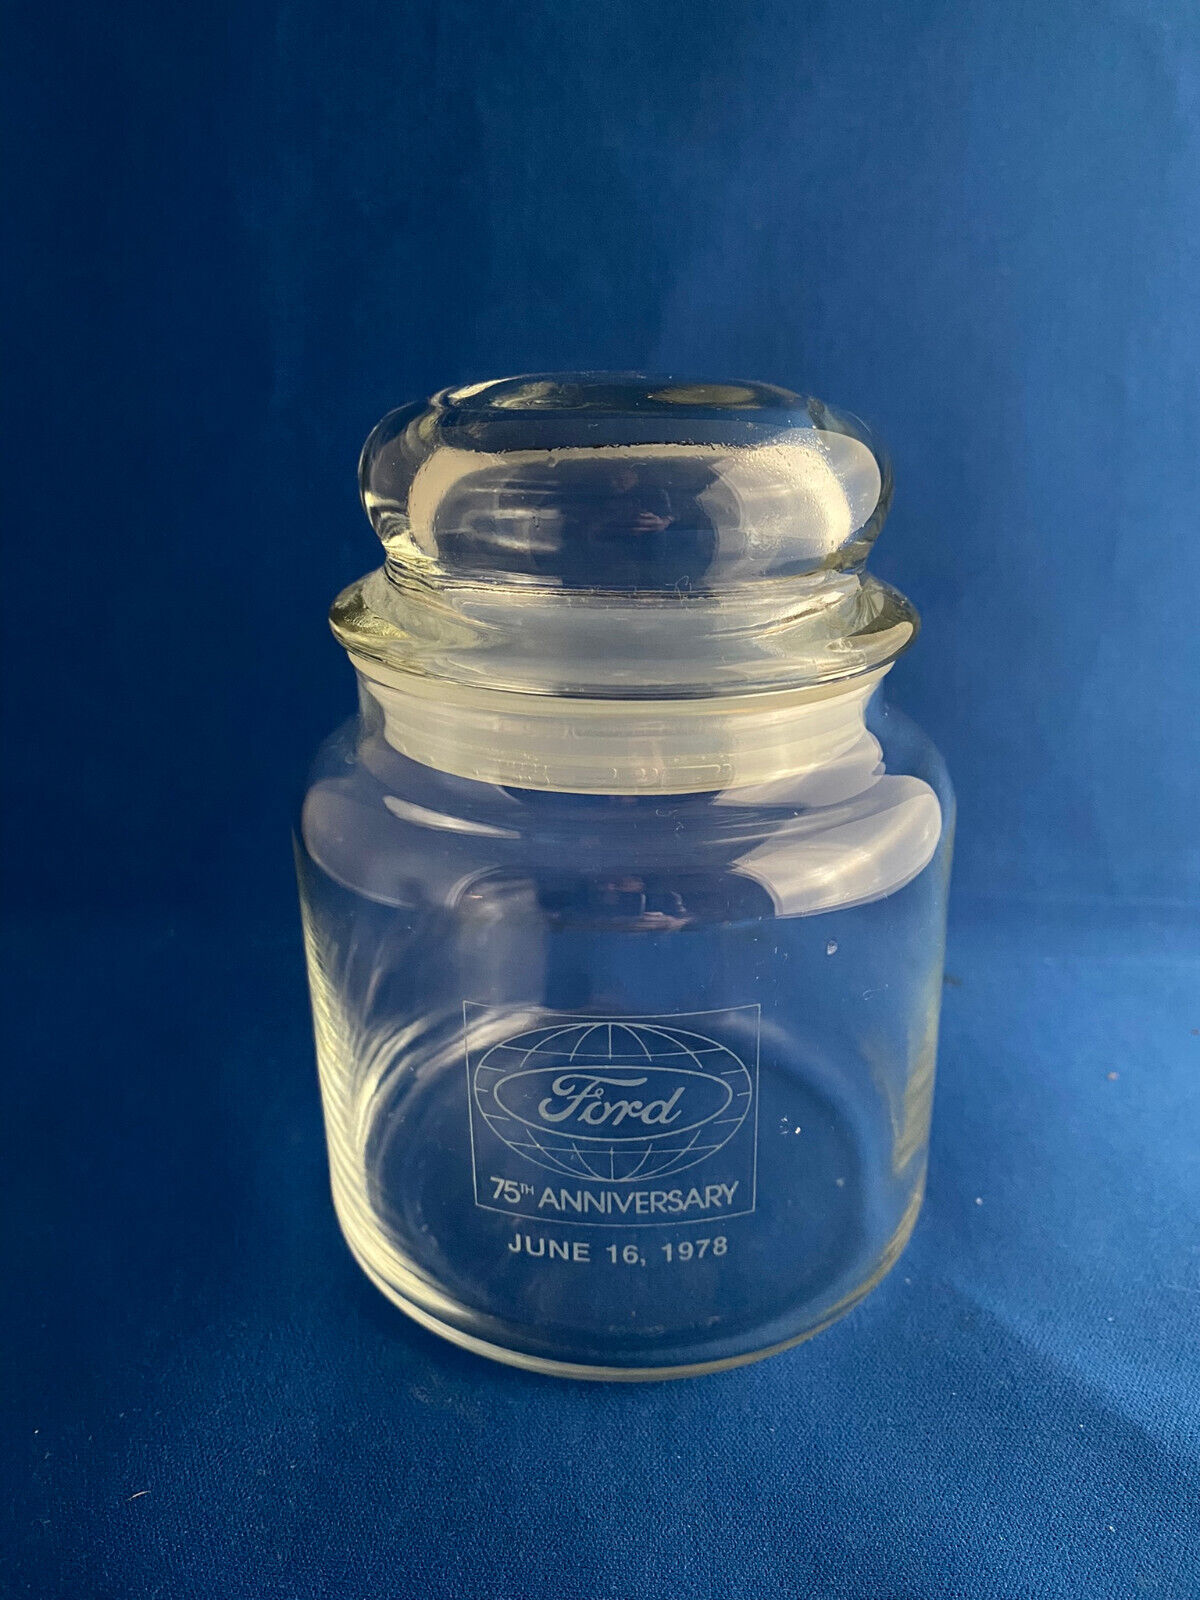 Commemorative Collectible Ford 75th Anniversary Sealed Candy or Storage Jar